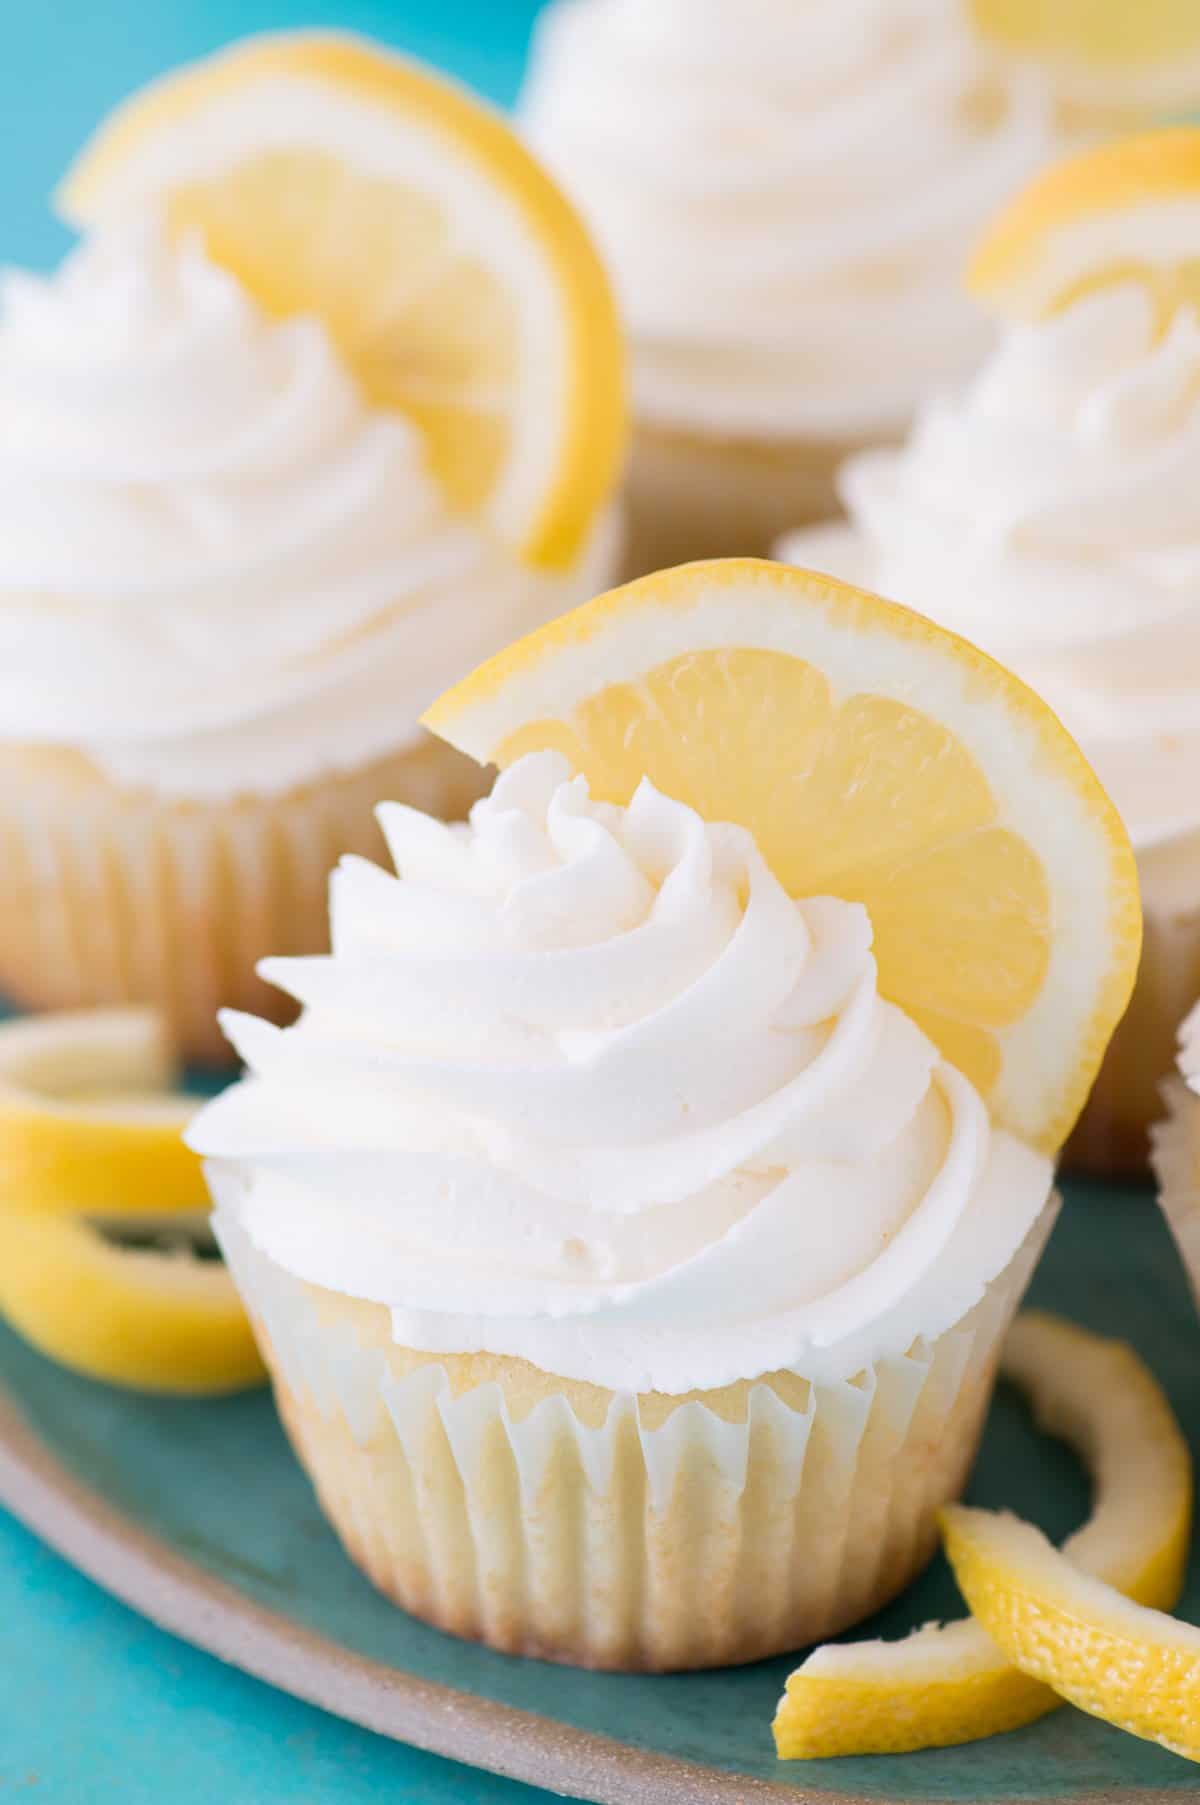 lemon cupcakes piped with lemon frosting and a lemon wedge on a teal plate and teal background